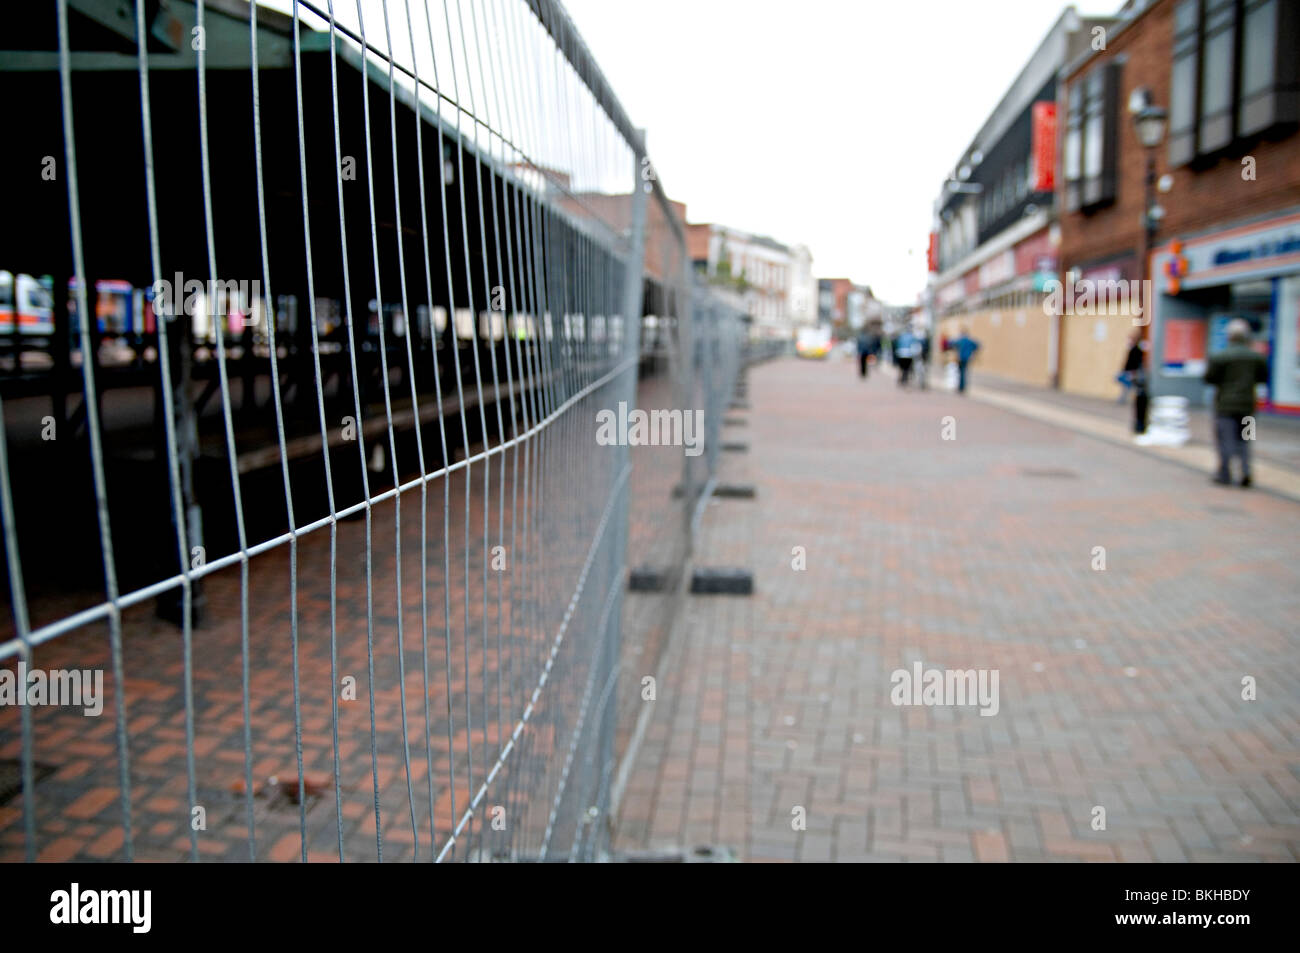 Dudley town centre during the edl demo April 2010, the whole town shut up and shops were boarded up like a ghost town Stock Photo